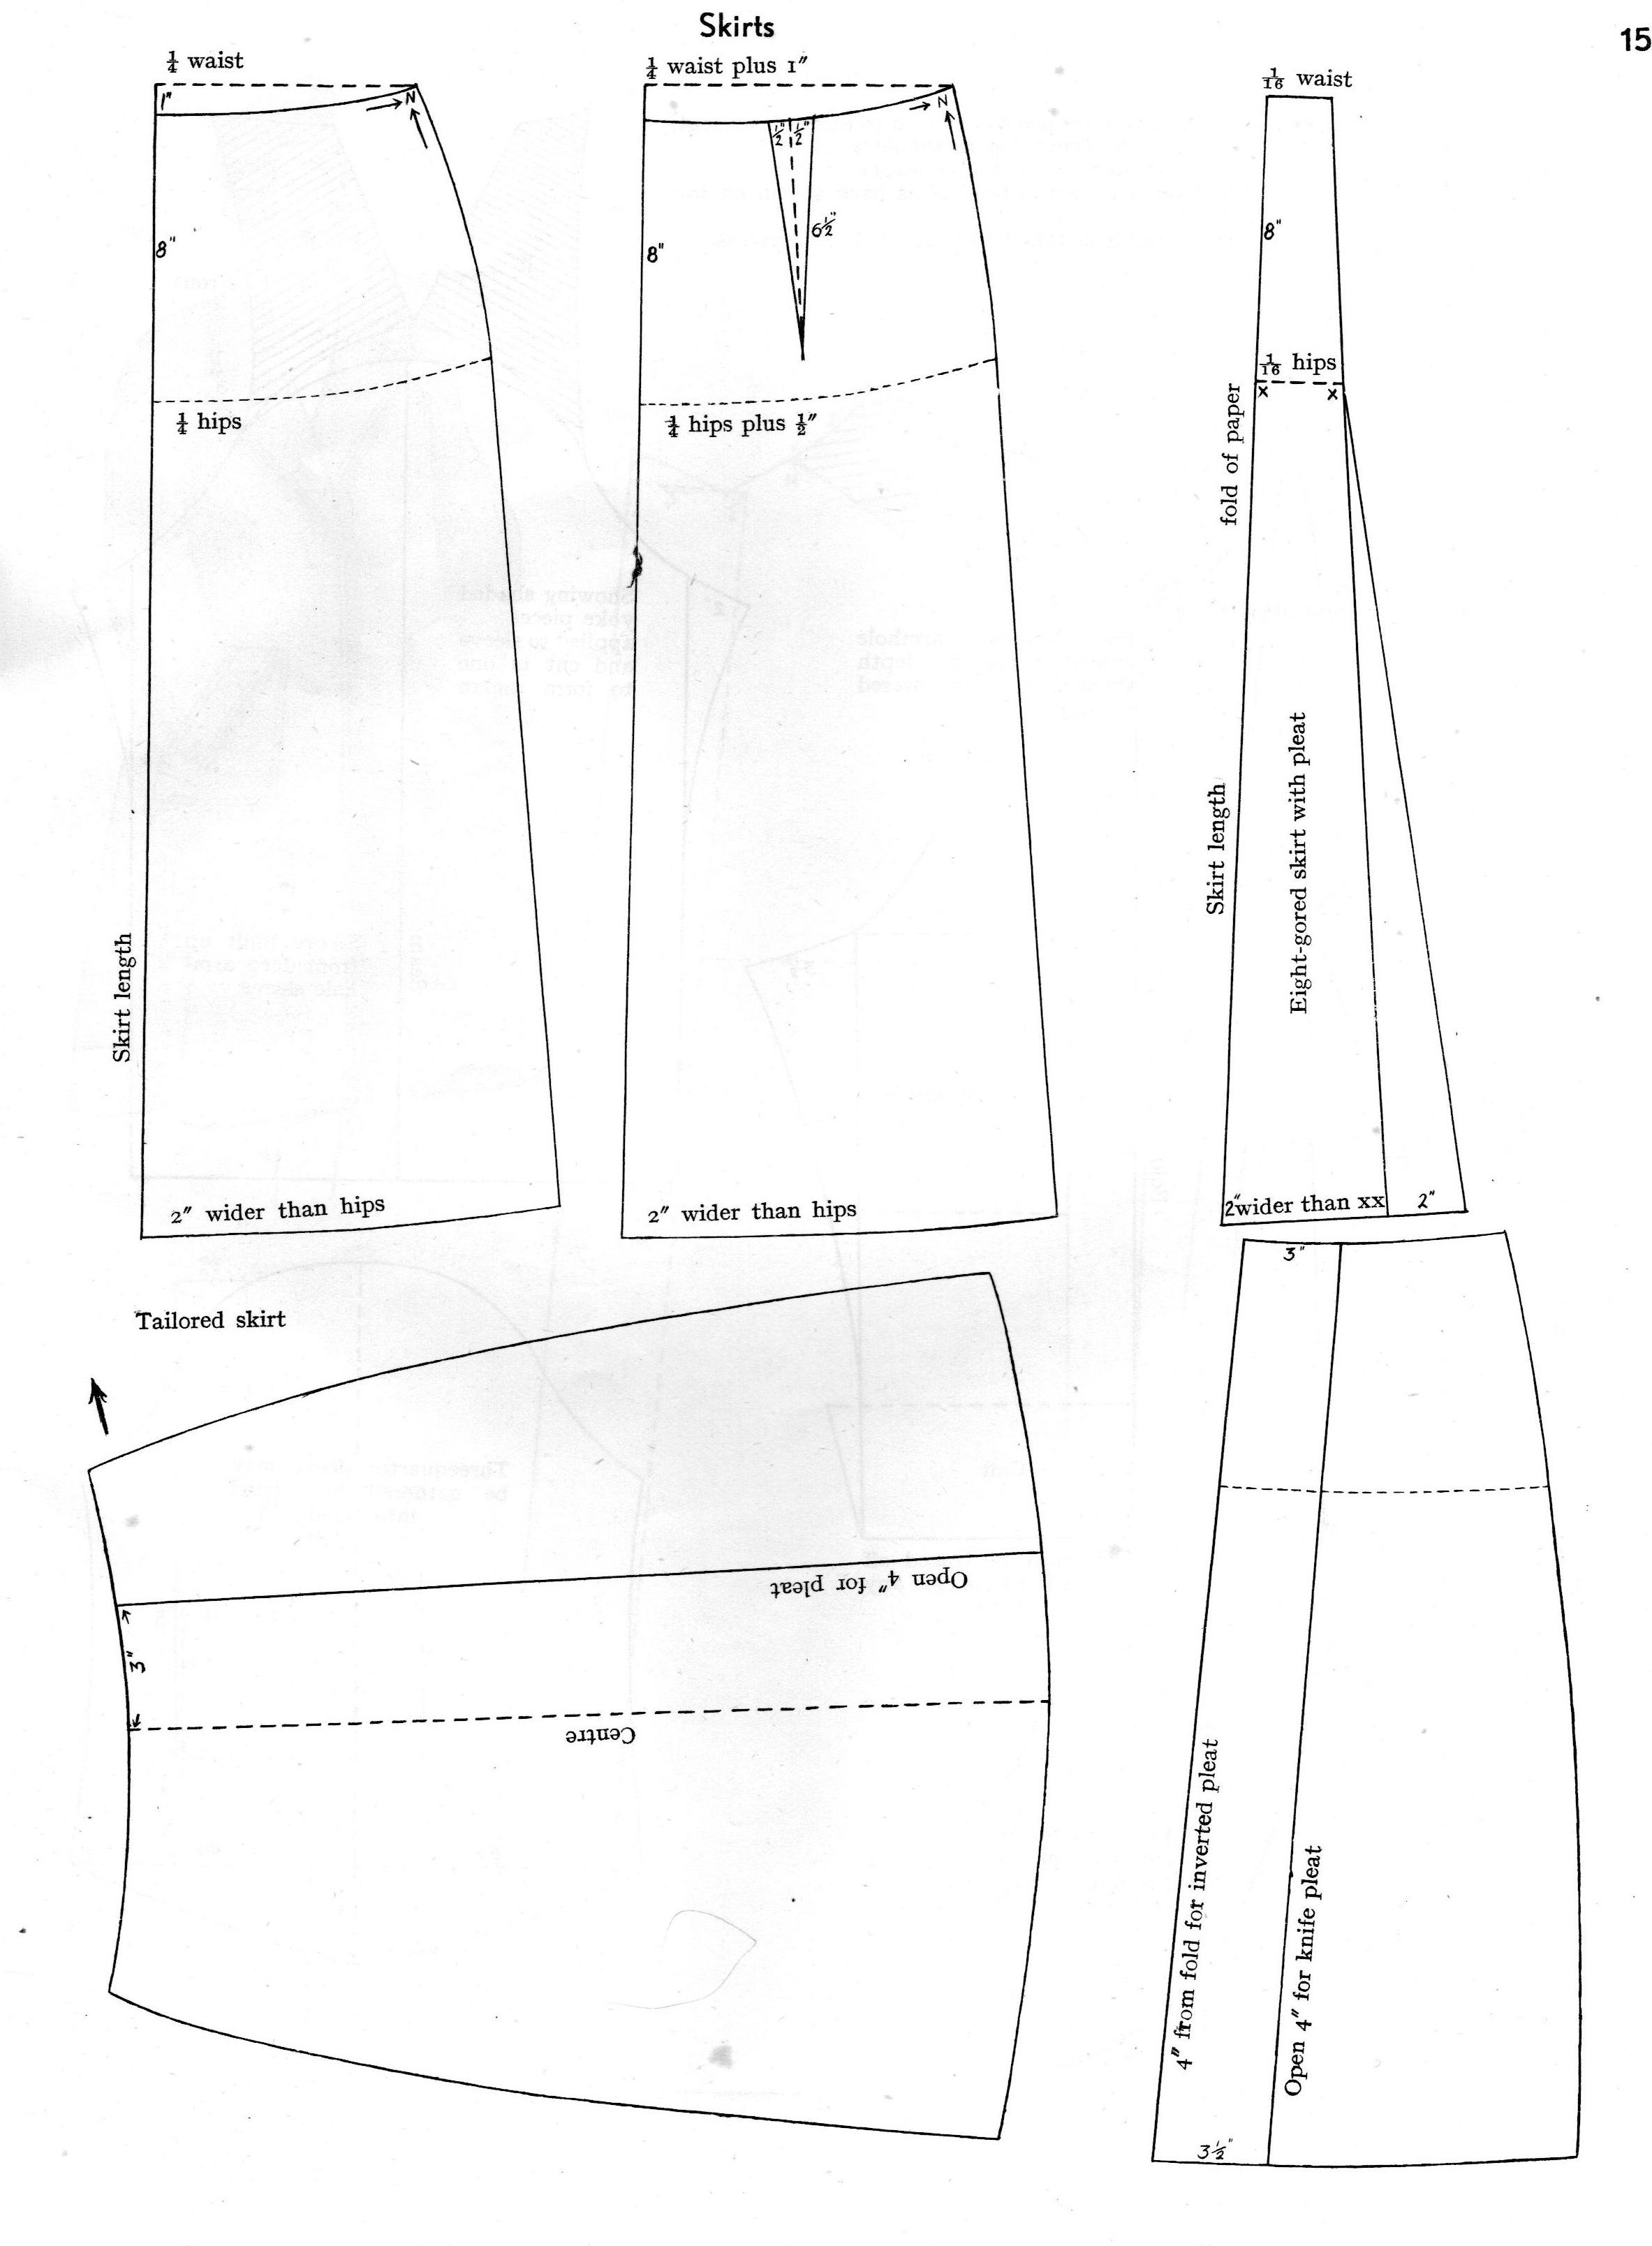 Basic Classic Skirt Pattern Diagram to make skirt in any size *1920's